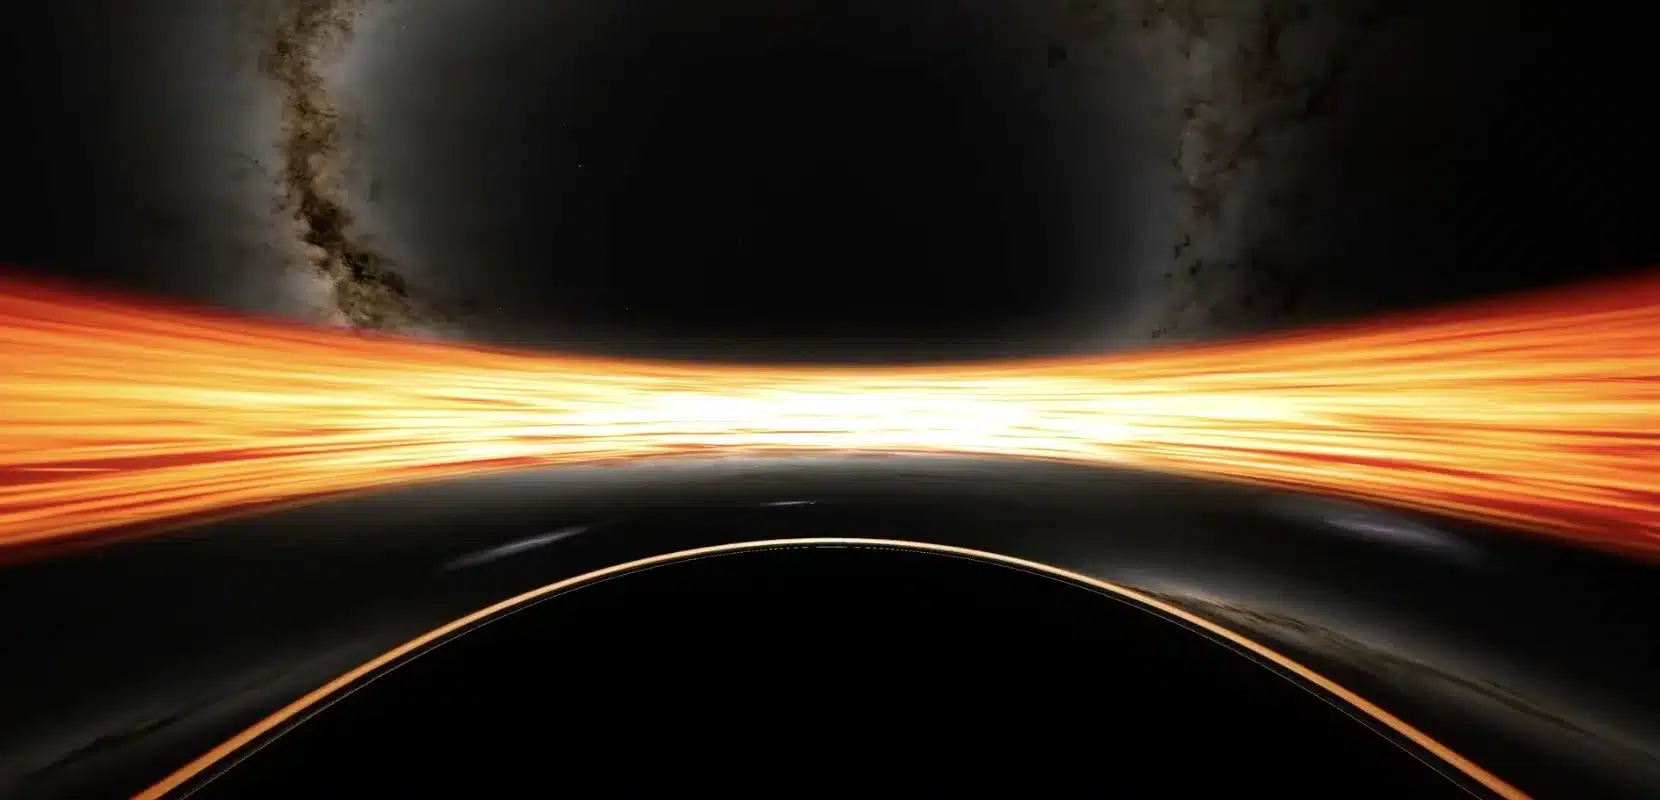 NASA uses supercomputer to create video showing what it's like to fall into a black hole